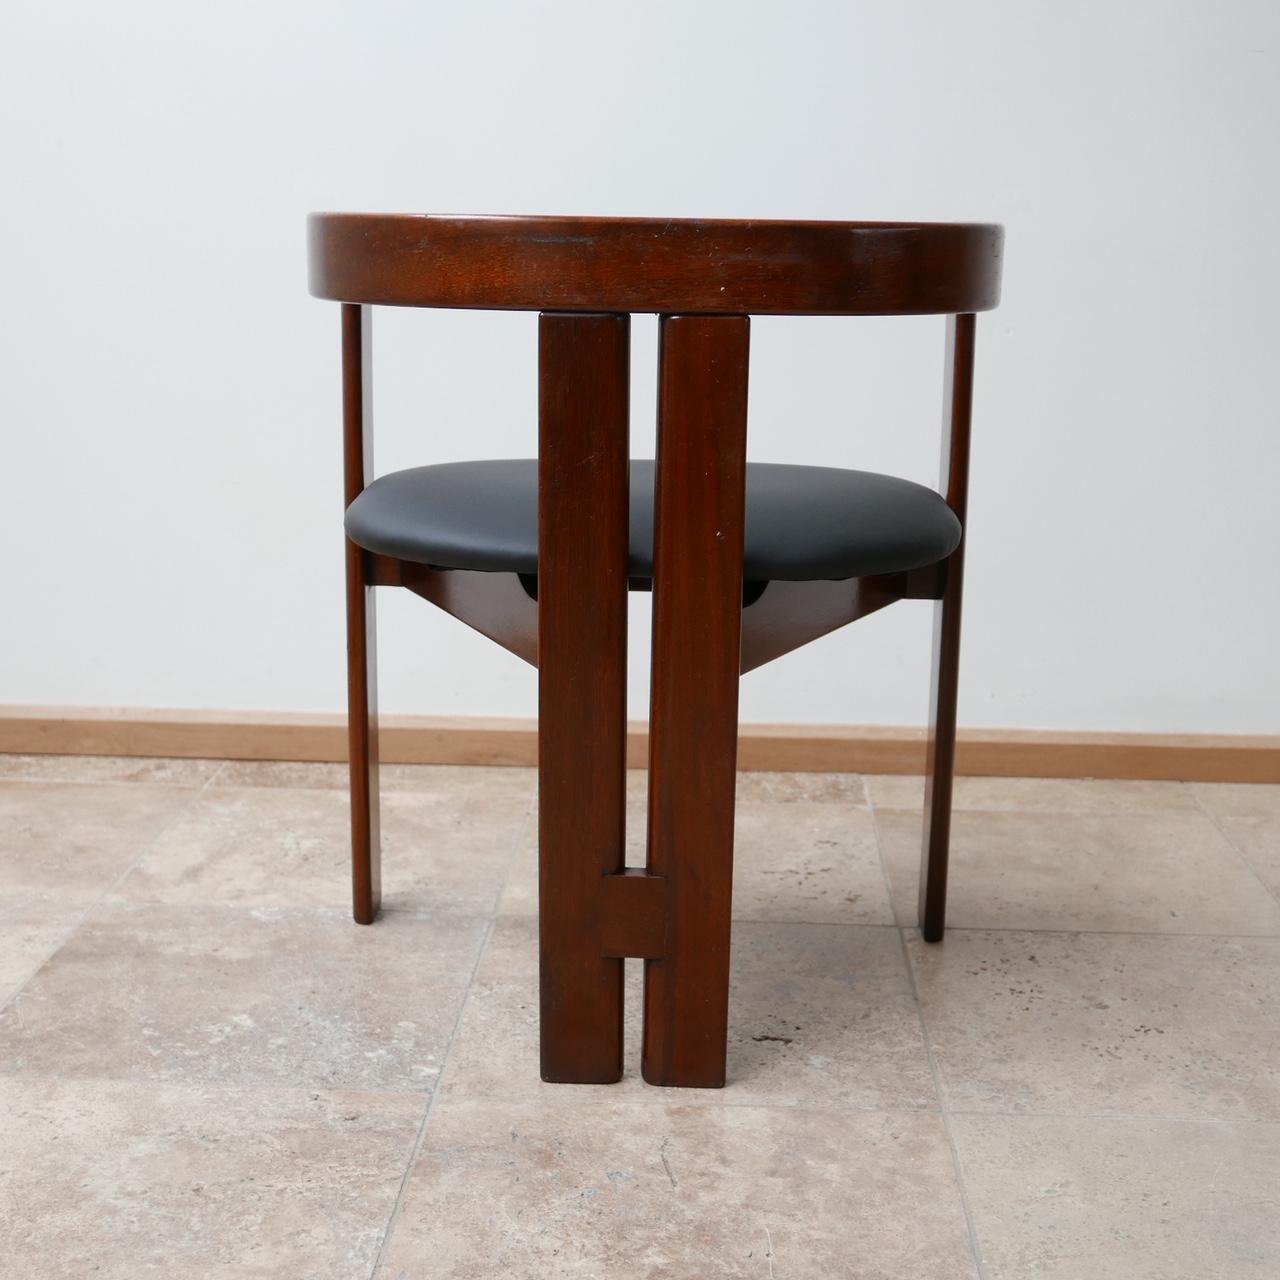 Leather 'Pigreco' Italian Midcentury Dining Chairs Attributed to Tobia Scarpa